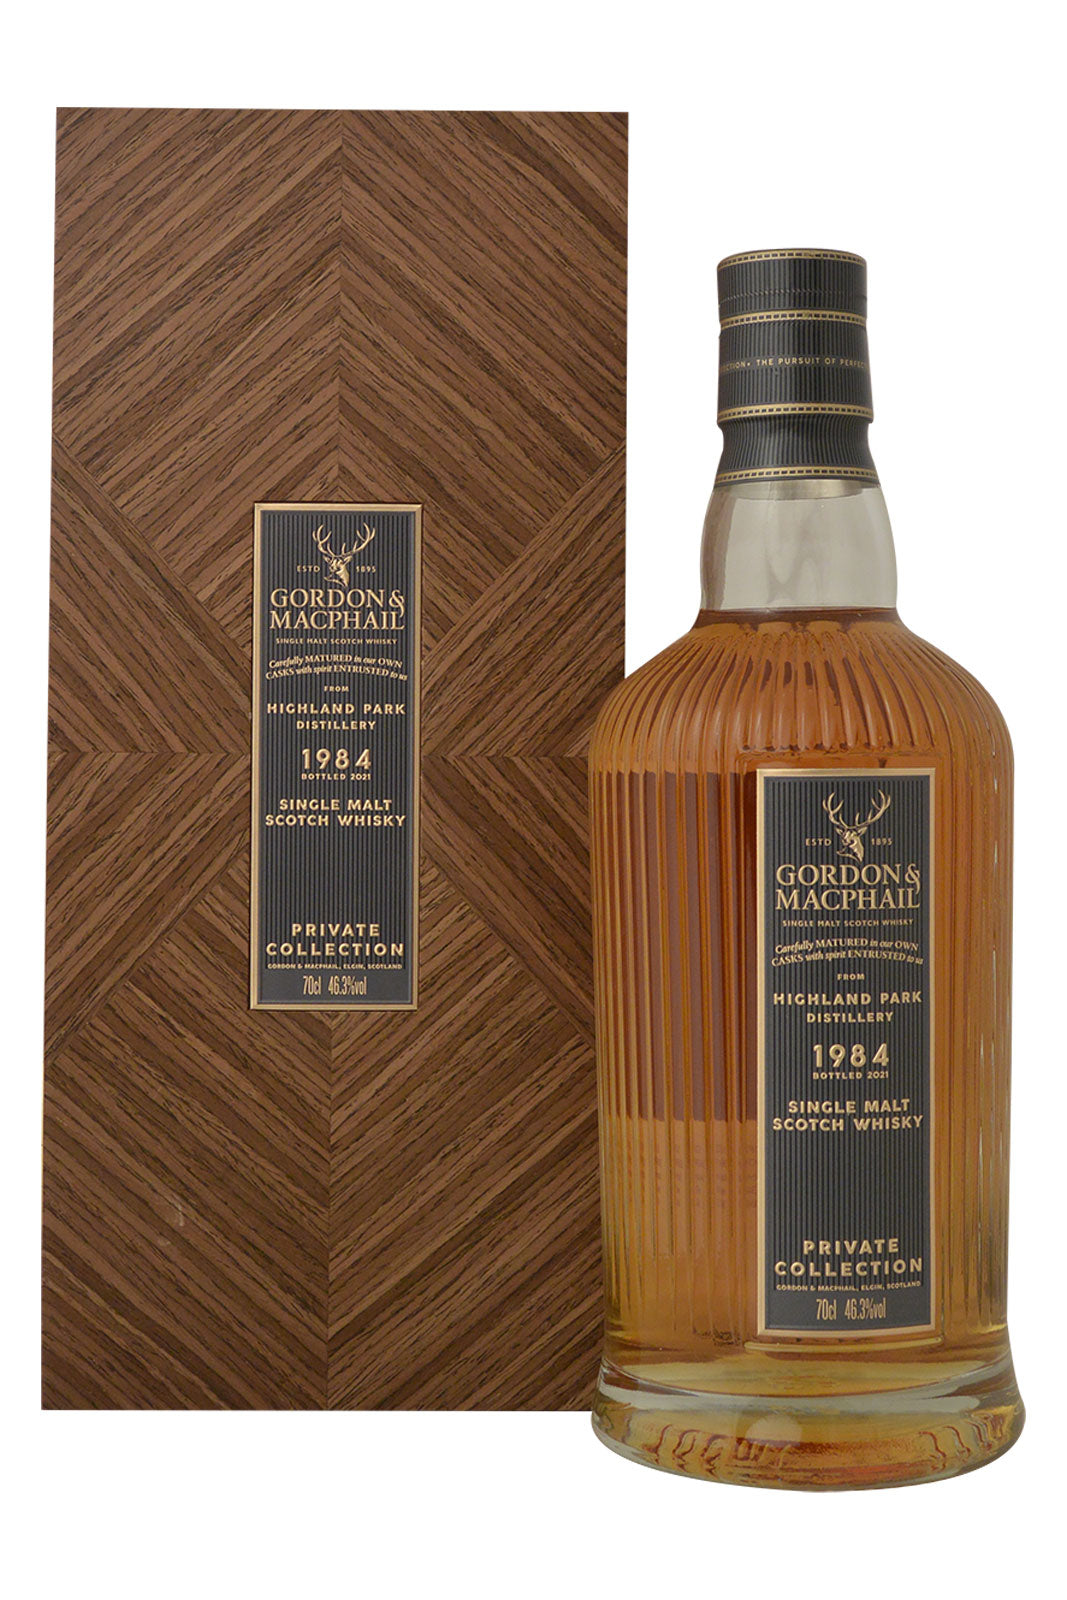 Highland Park 1984 Gordon & MacPhail Private Collection